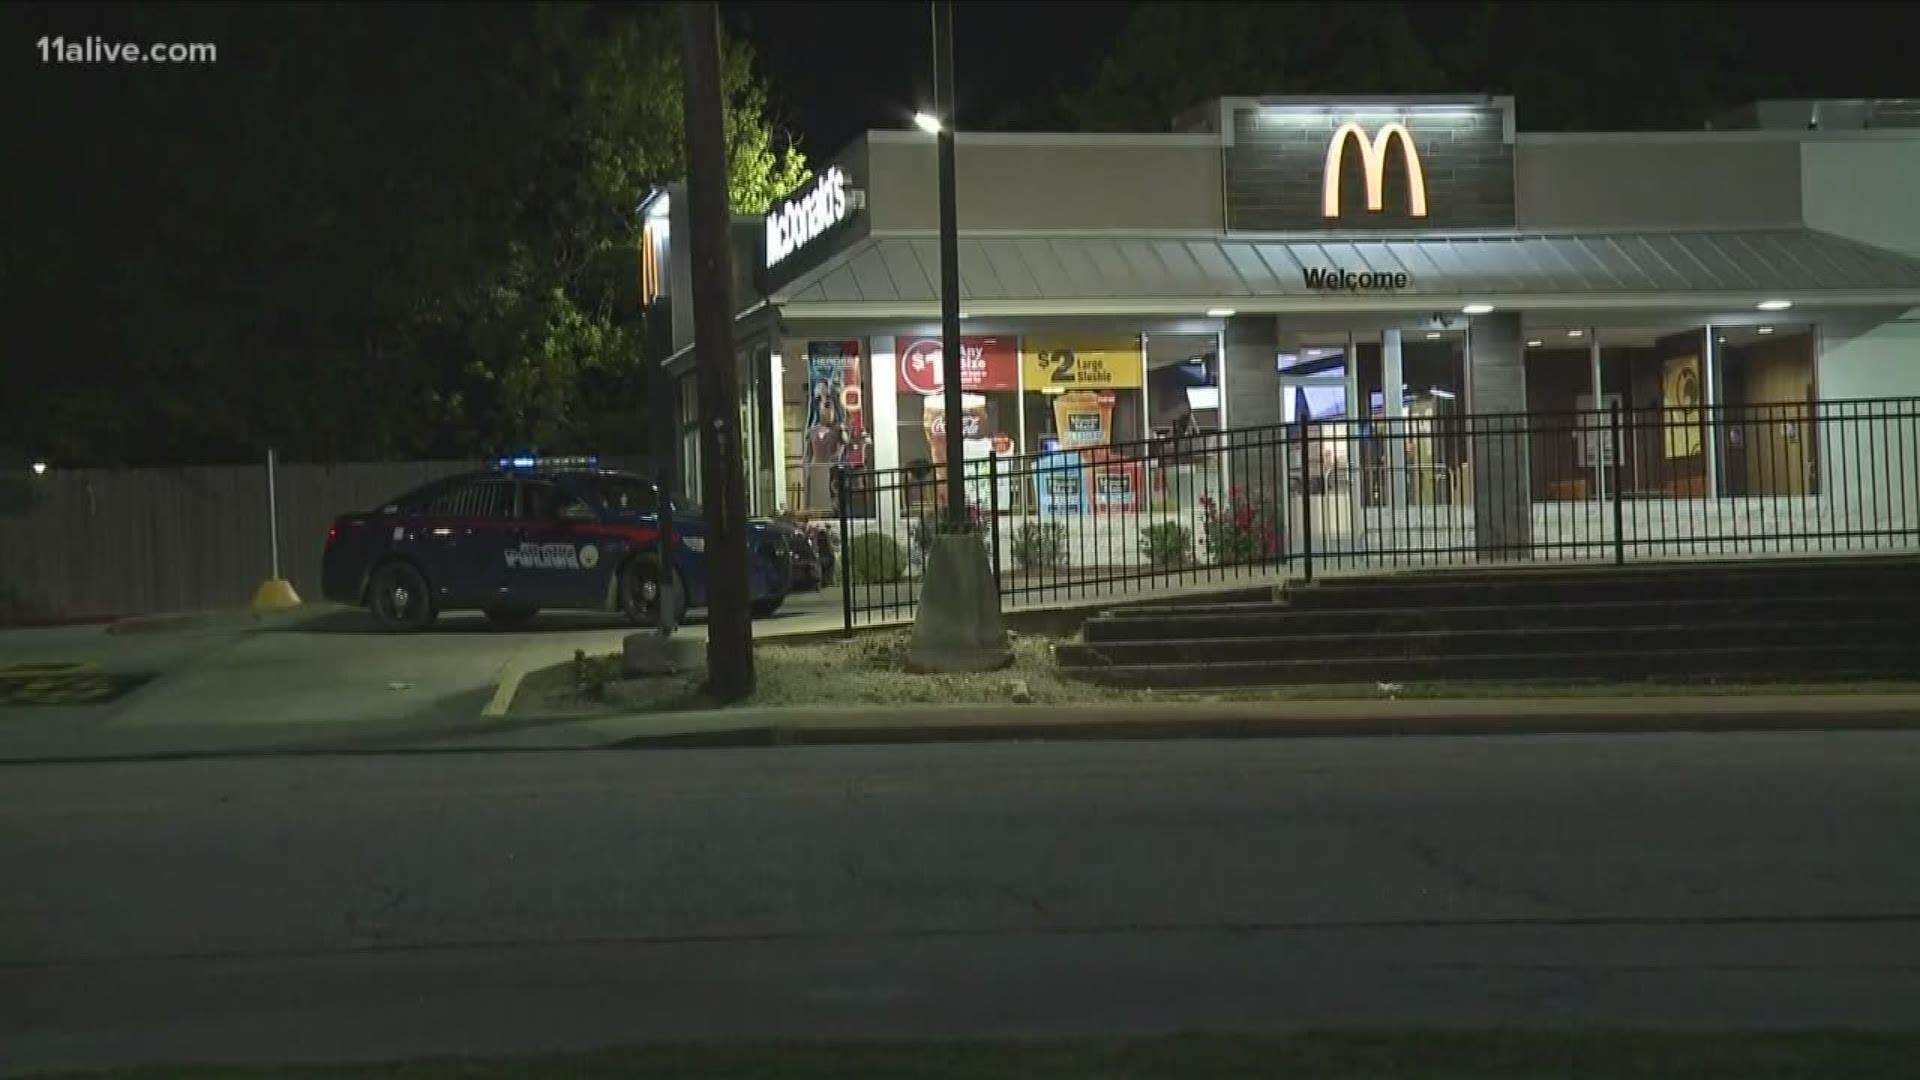 The worker inside ran away from the window right before the suspect fired the shots.